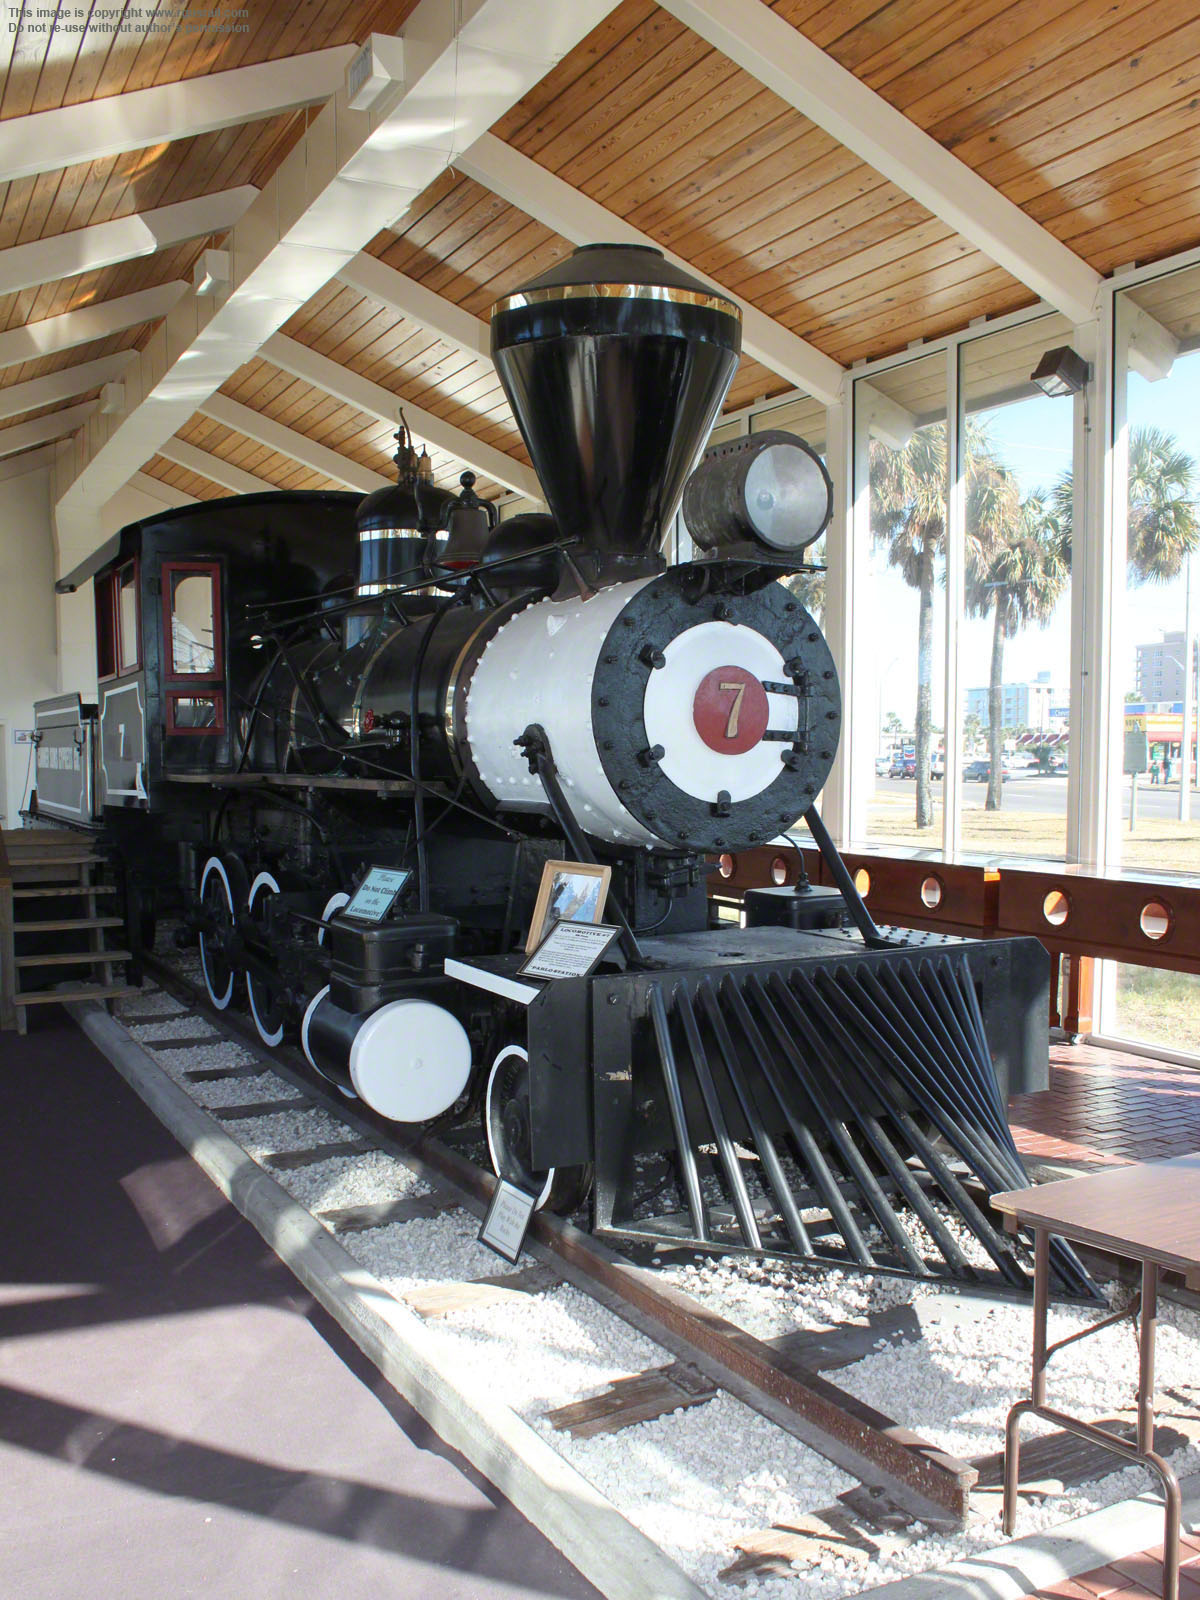  Comapny narrow gauge #7 at Pablo Station in Jacksonville Beach, FL